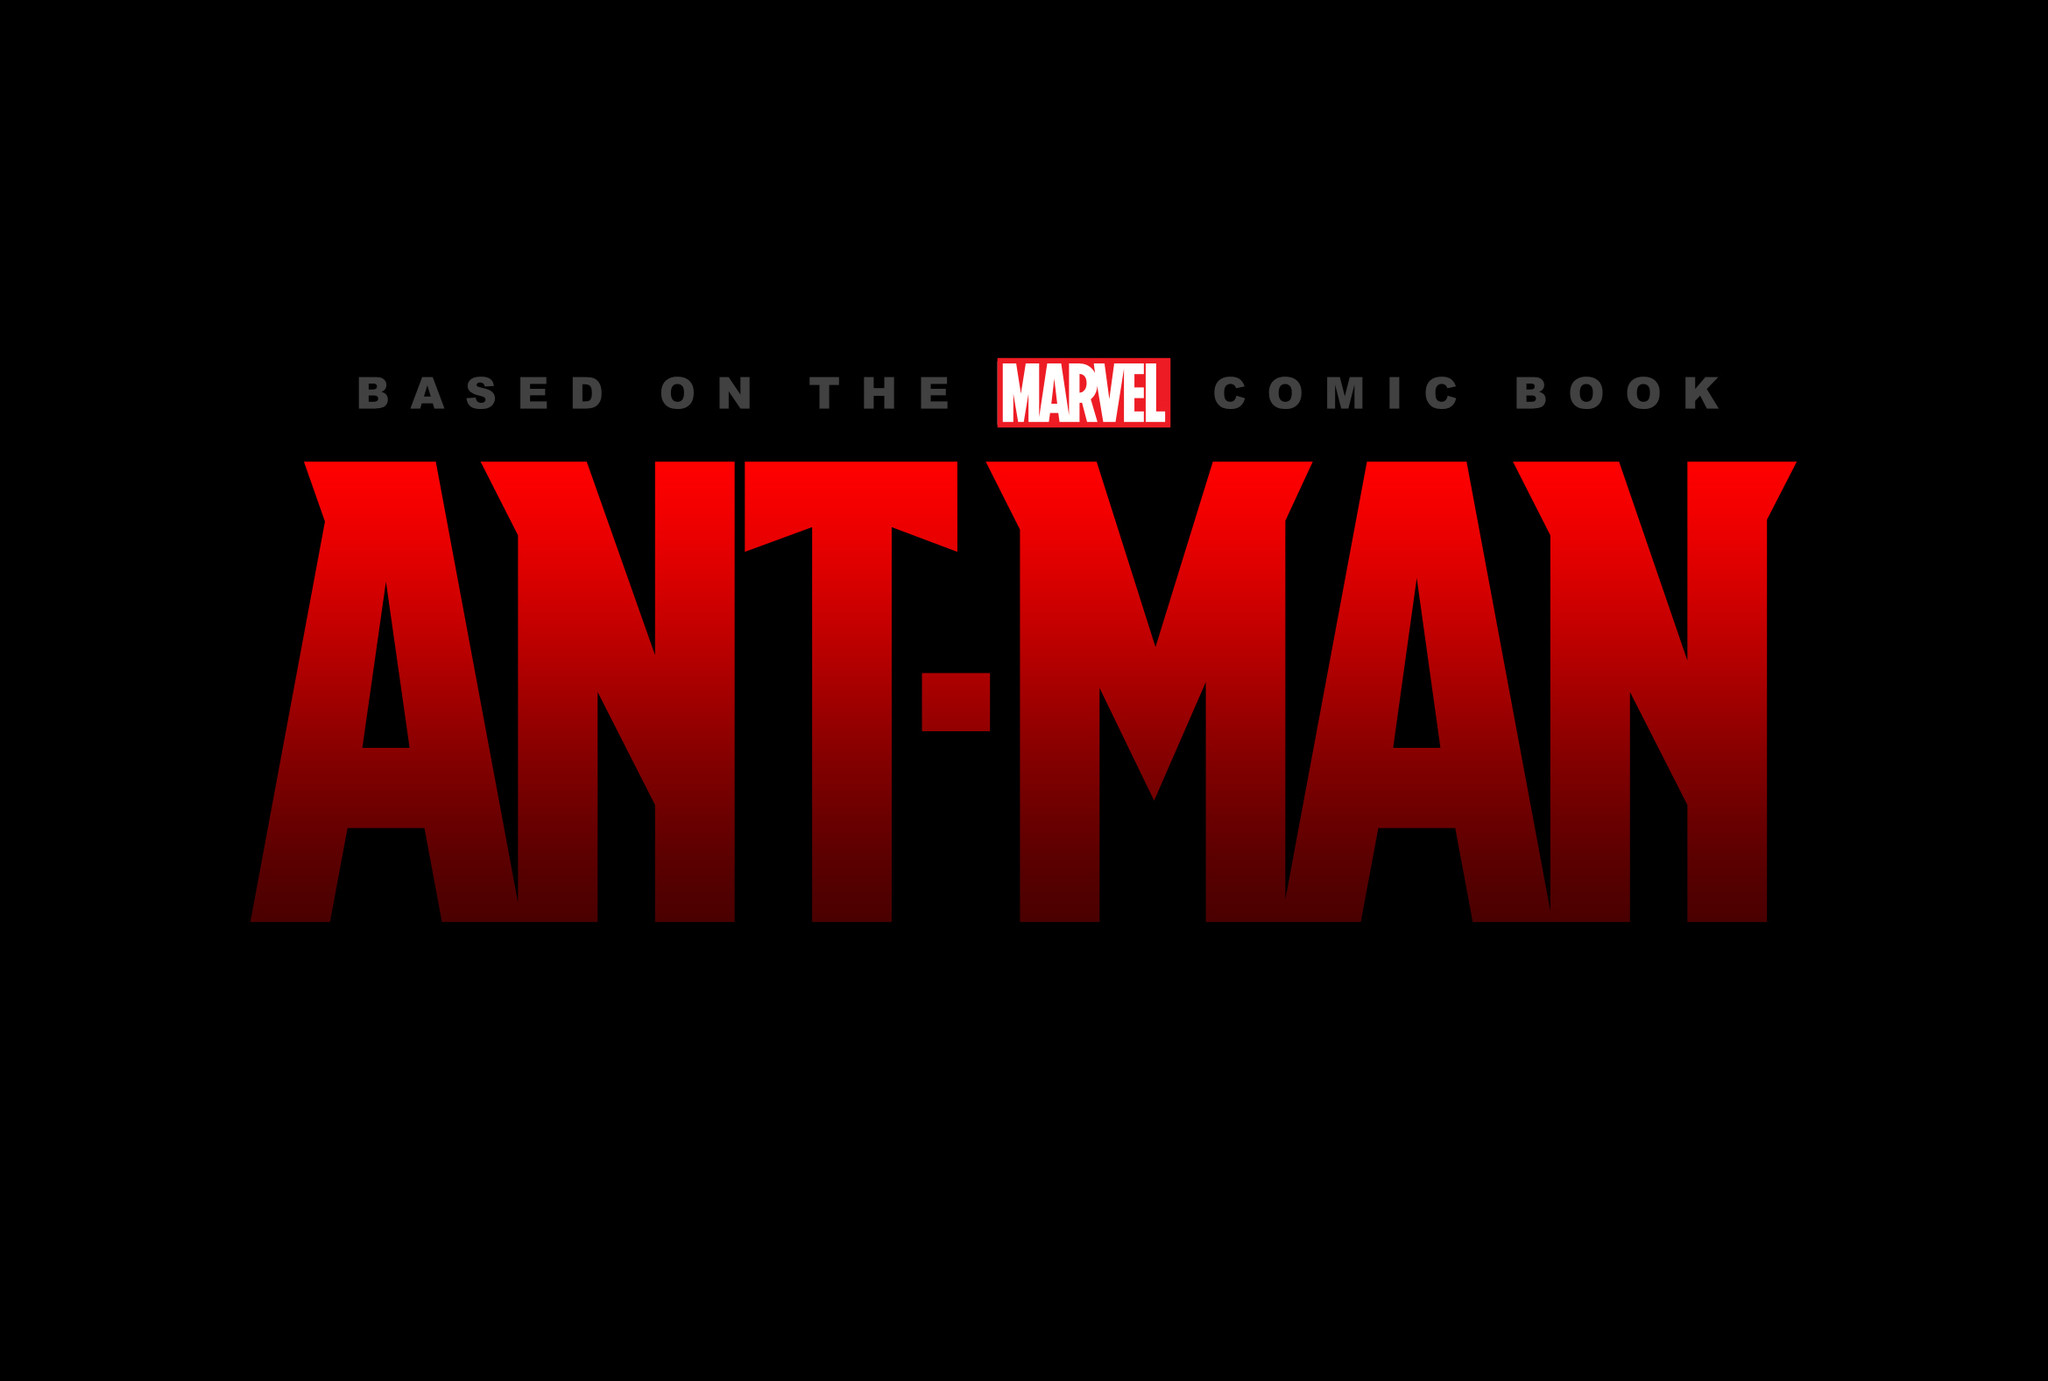 Marvel’s ‘Ant-Man’ Moves Up From November to July 2015.